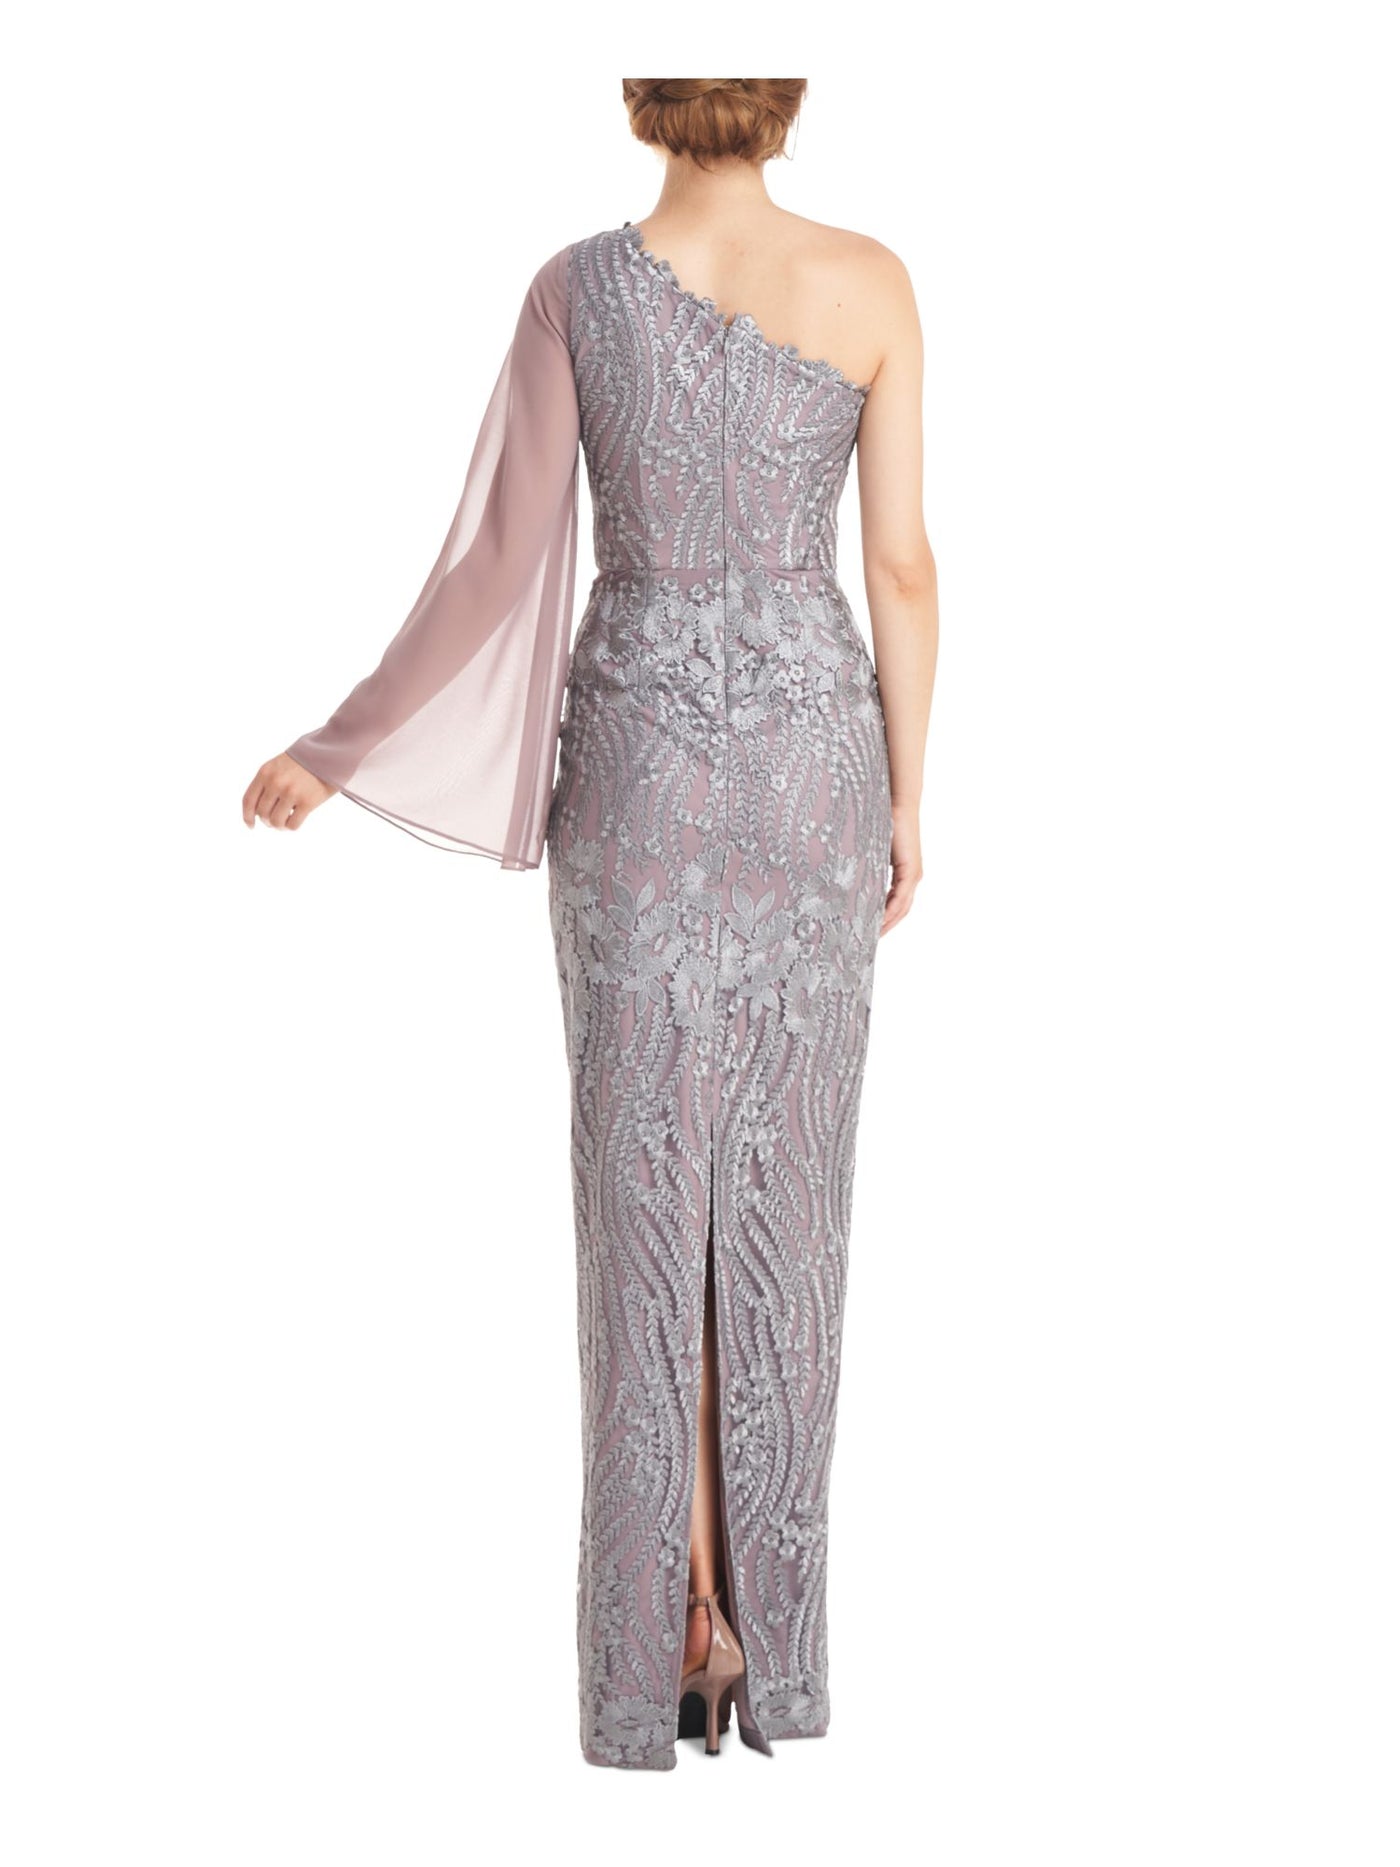 JS COLLECTIONS Womens Silver Embroidered Zippered Overlay Lined Floral Long Sleeve Asymmetrical Neckline Full-Length Evening Gown Dress 8